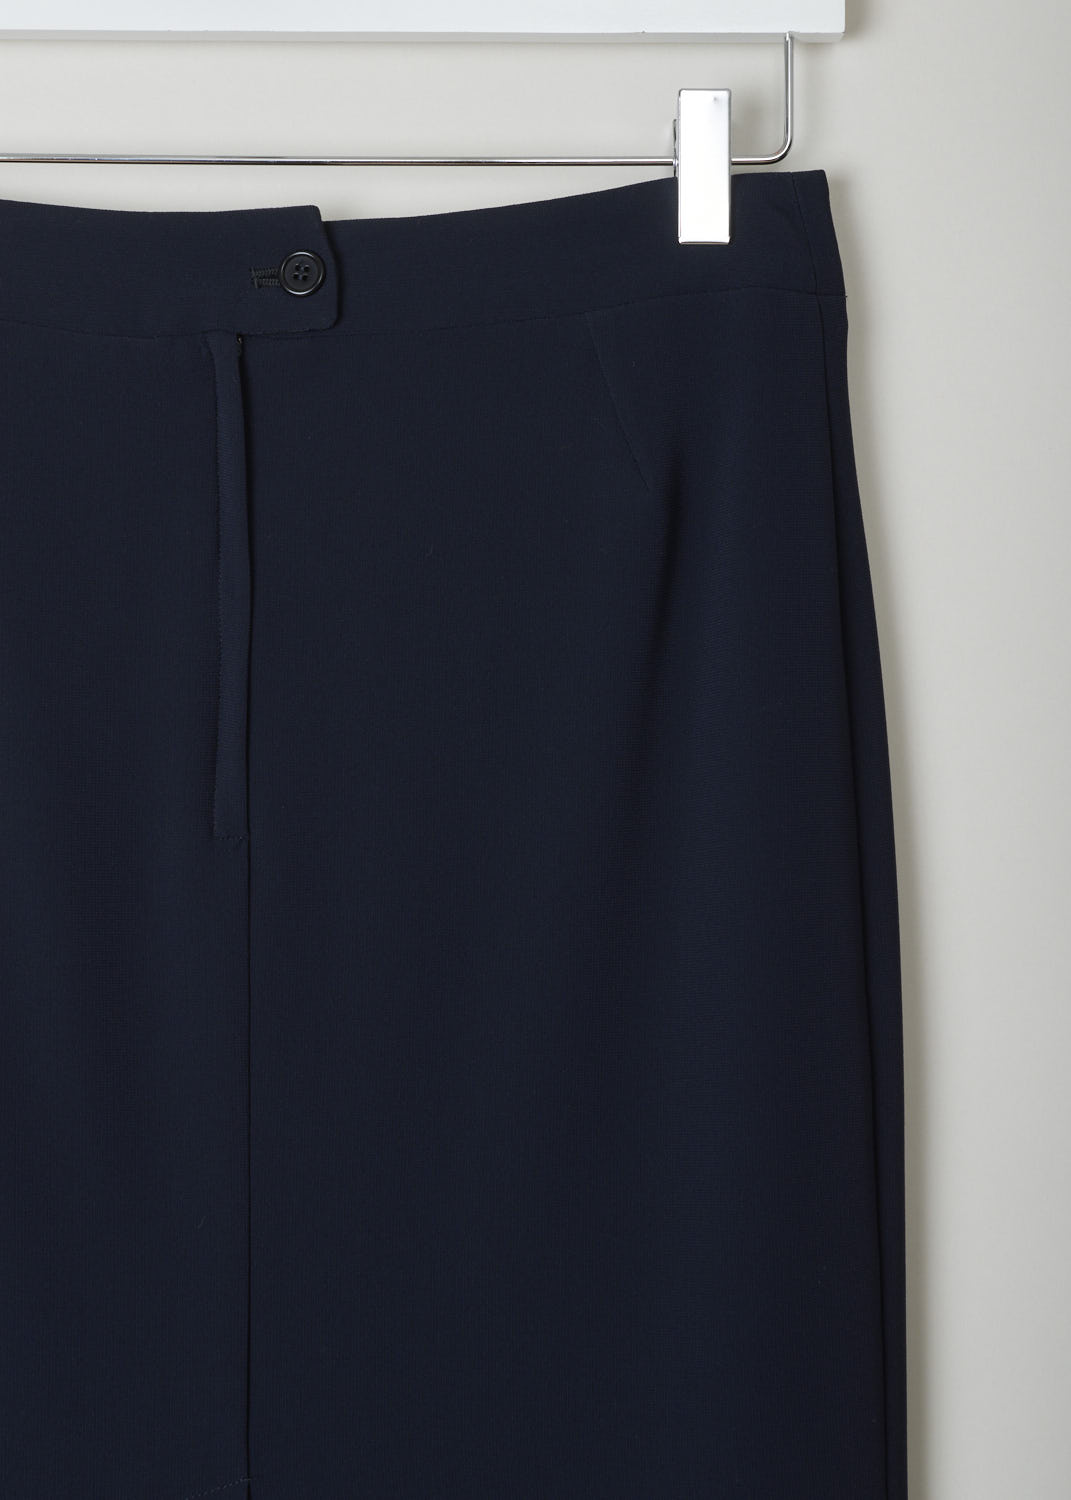 ASPESI, NAVY BLUE PENCIL SKIRT, 2232_2088_10098, Blue. Detail, Classic navy blue pencil skirt made from a silky smooth fabric. The skirt has a button and zipper closure in the back. A center slip can also be found in the back.
